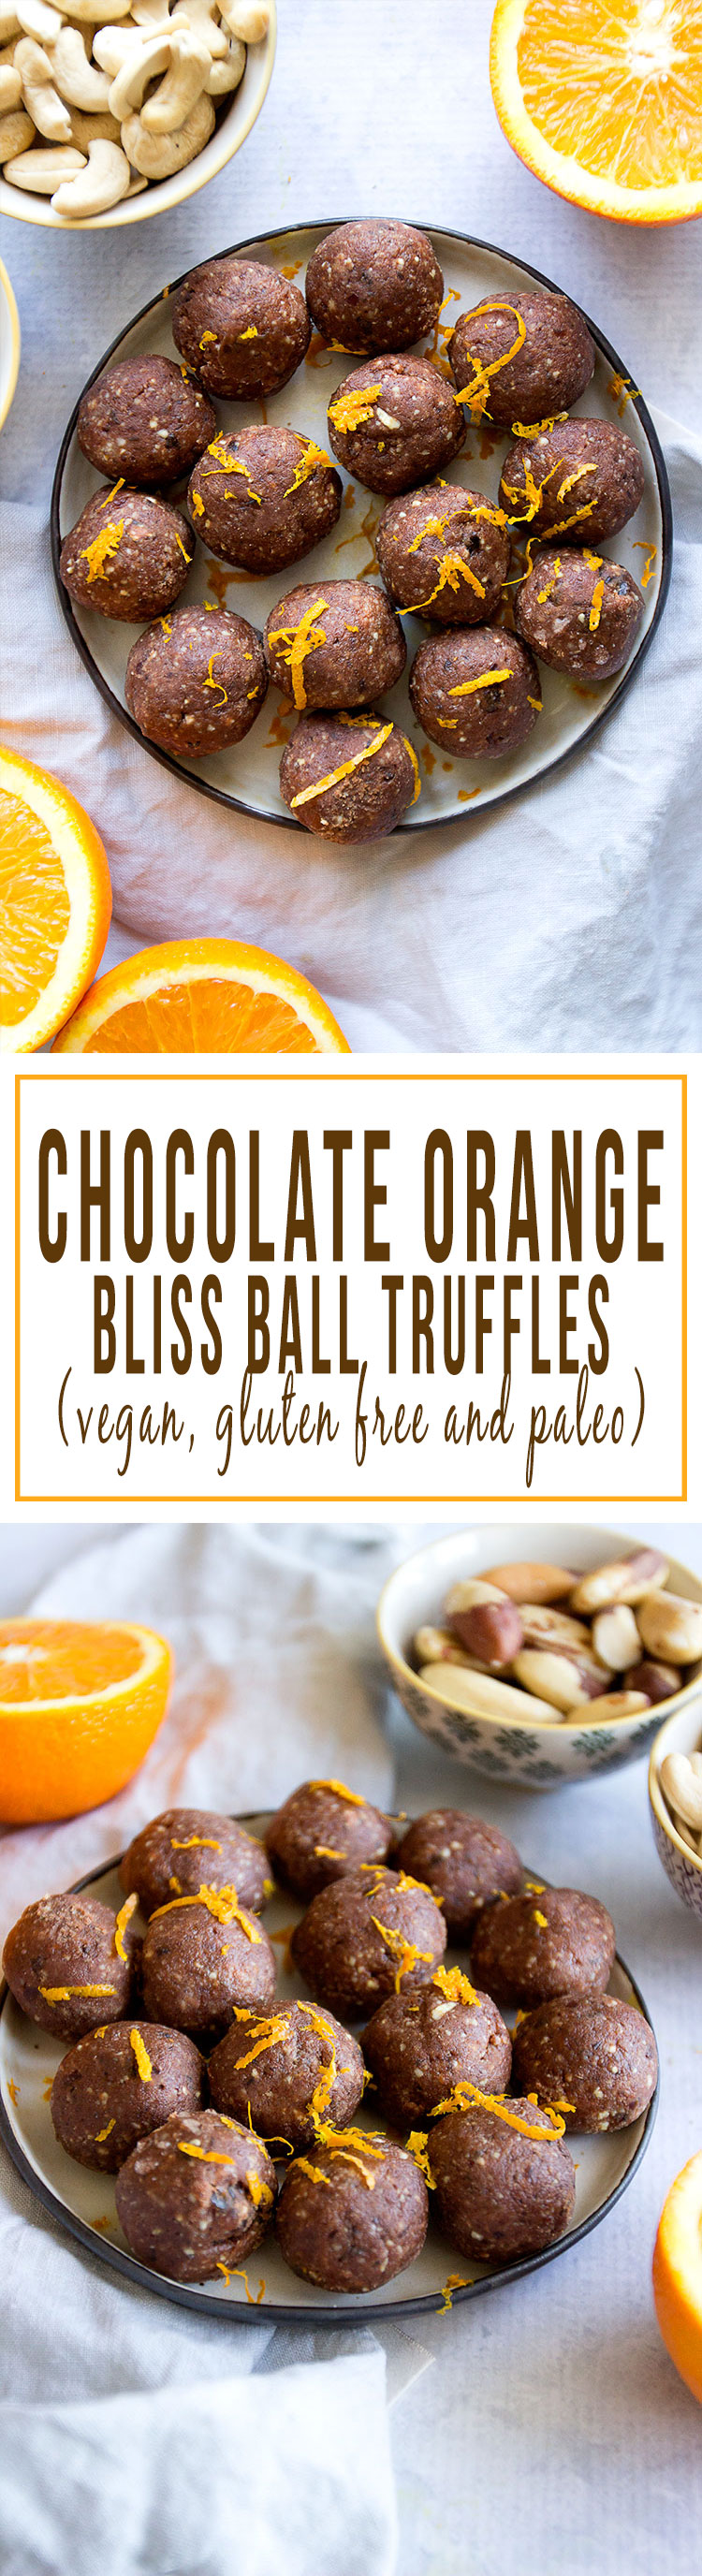 Chocolate Orange Bliss Ball Truffles | the perfect snack filled dates, cacao, orange, cashews and brazil nuts. High in fibre and protein, these really are a delicious homemade snack!